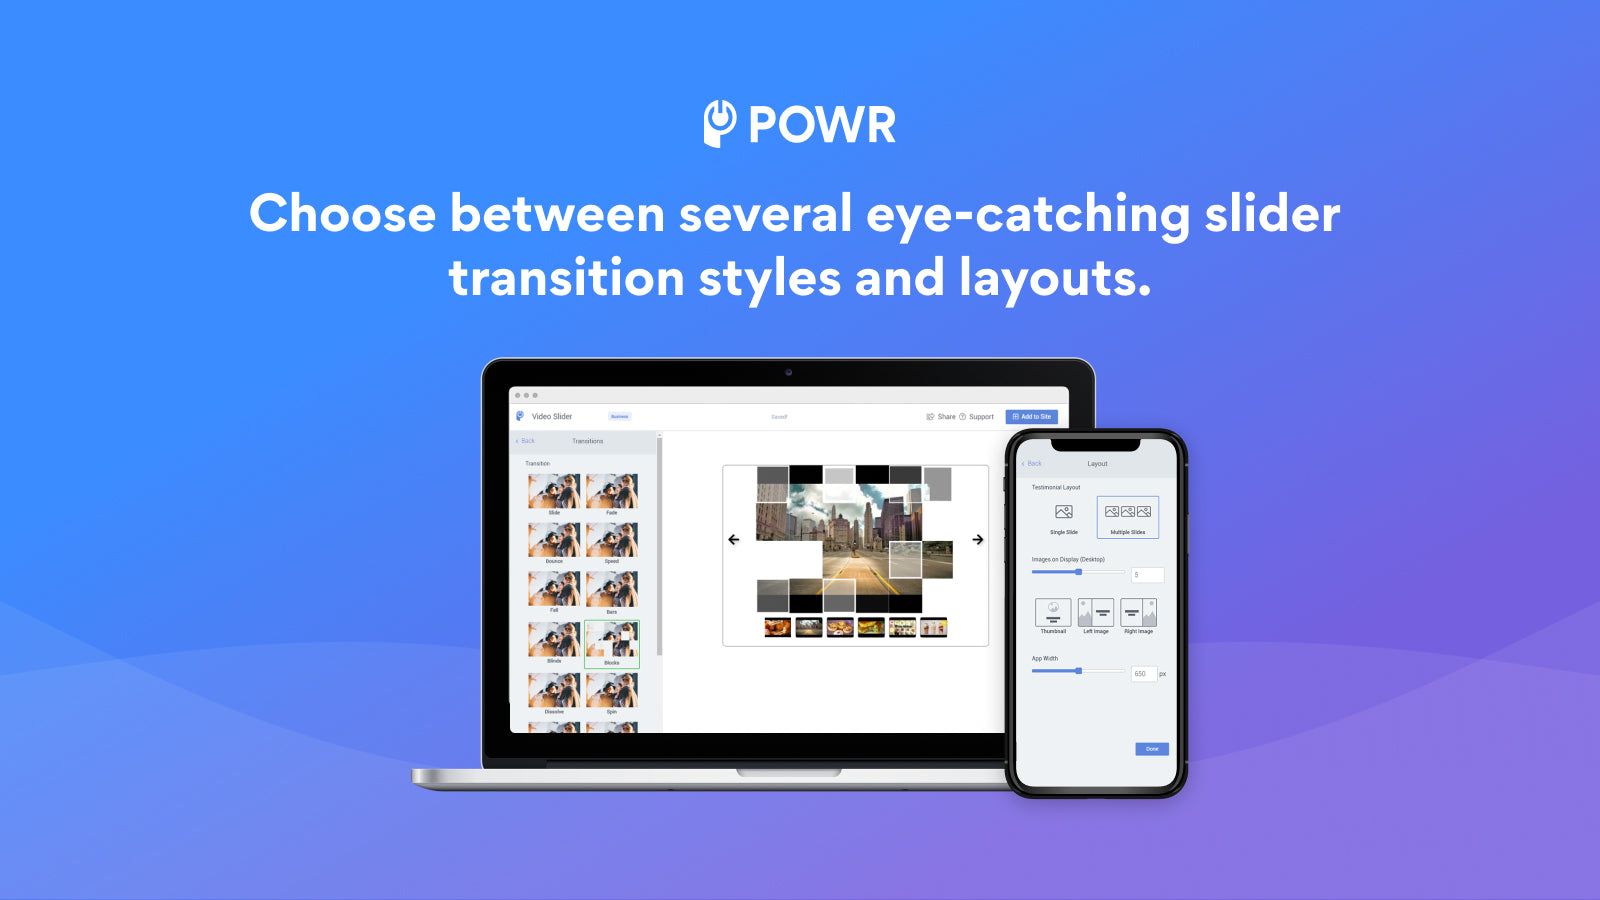 Choose between several eye-catching transitions and layouts